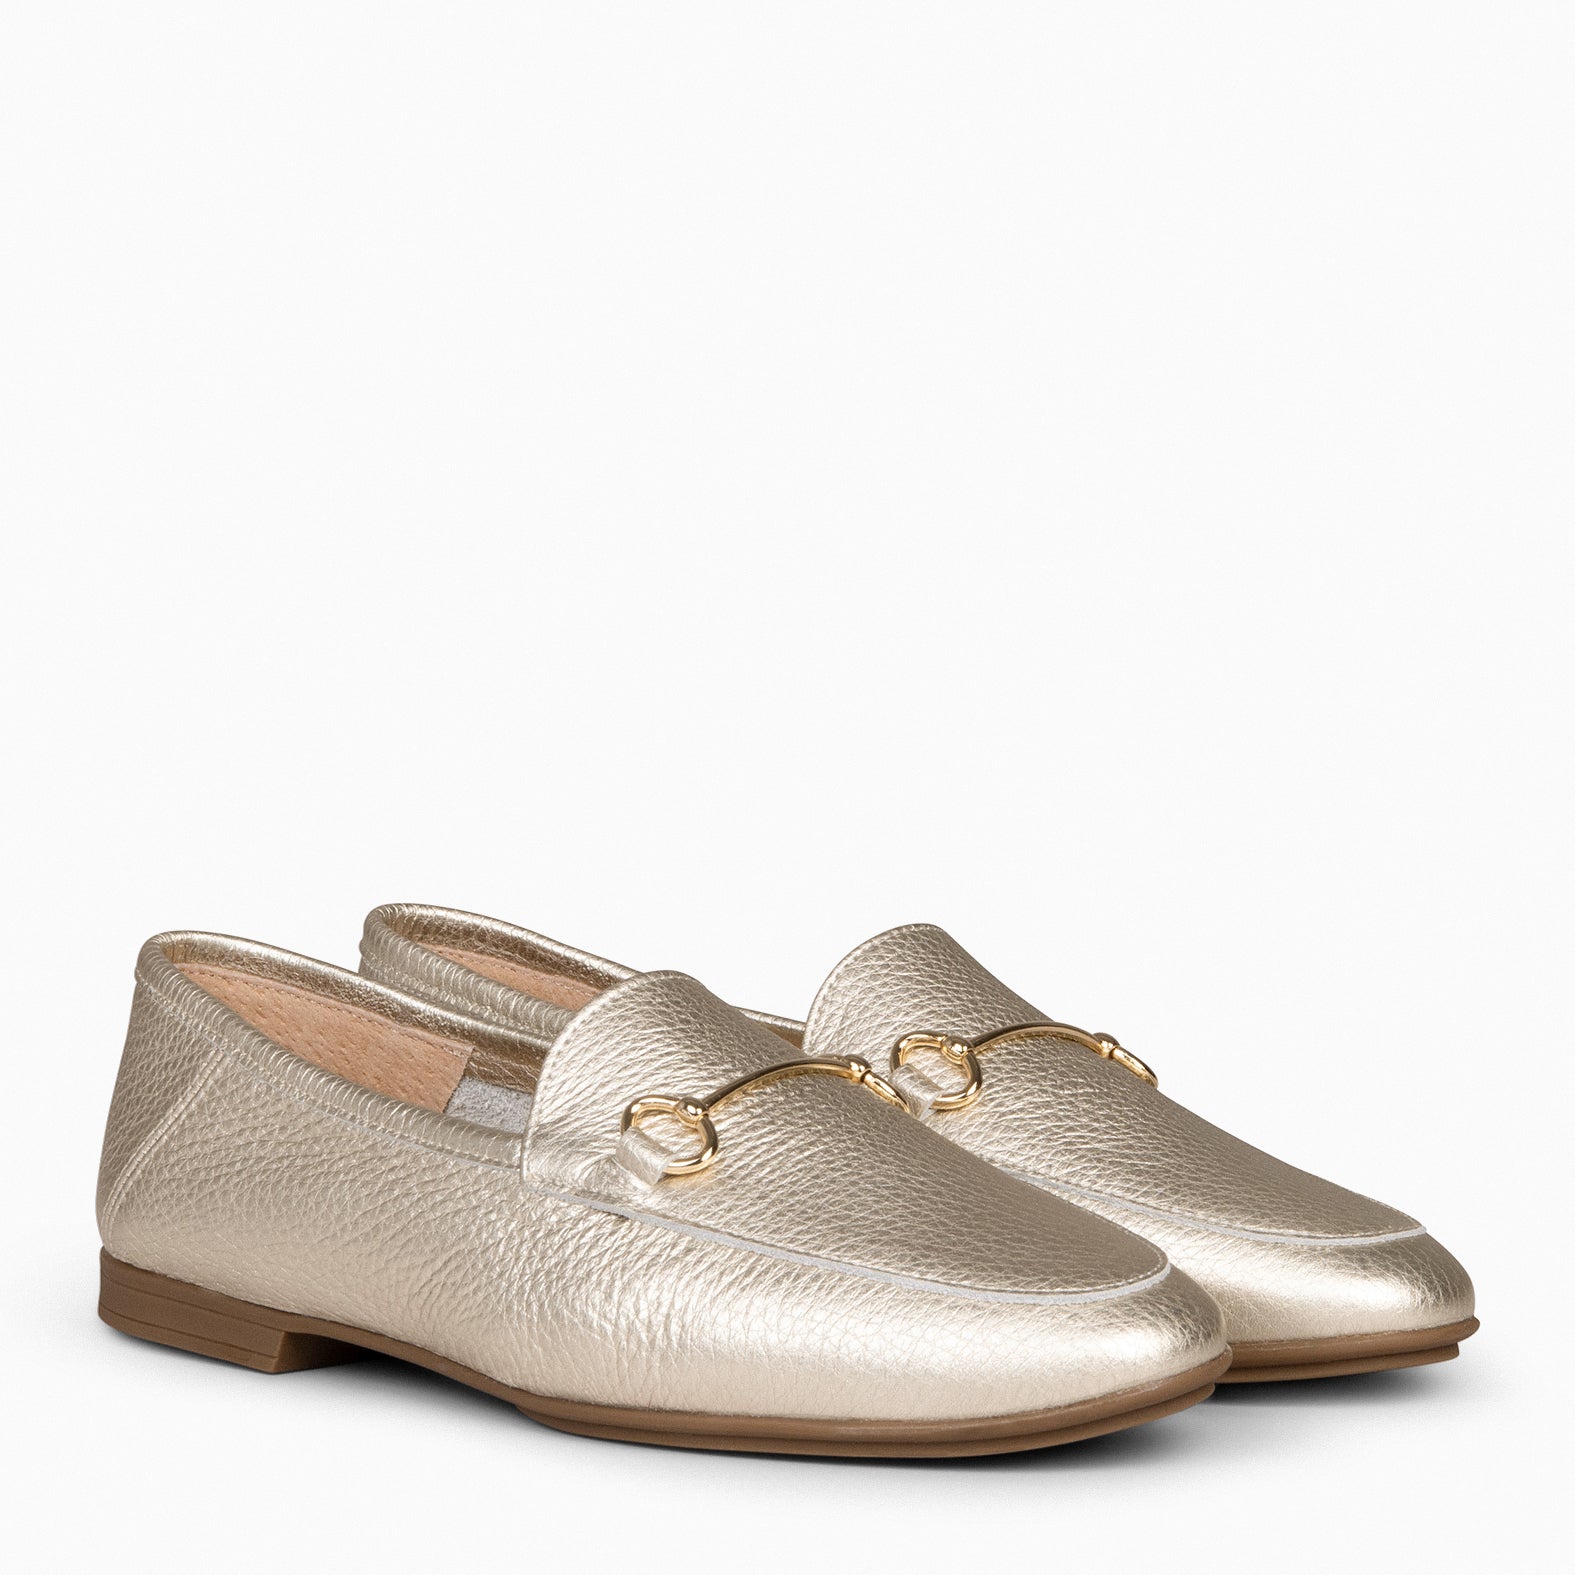 STYLE – GOLDEN moccasins with horsebit